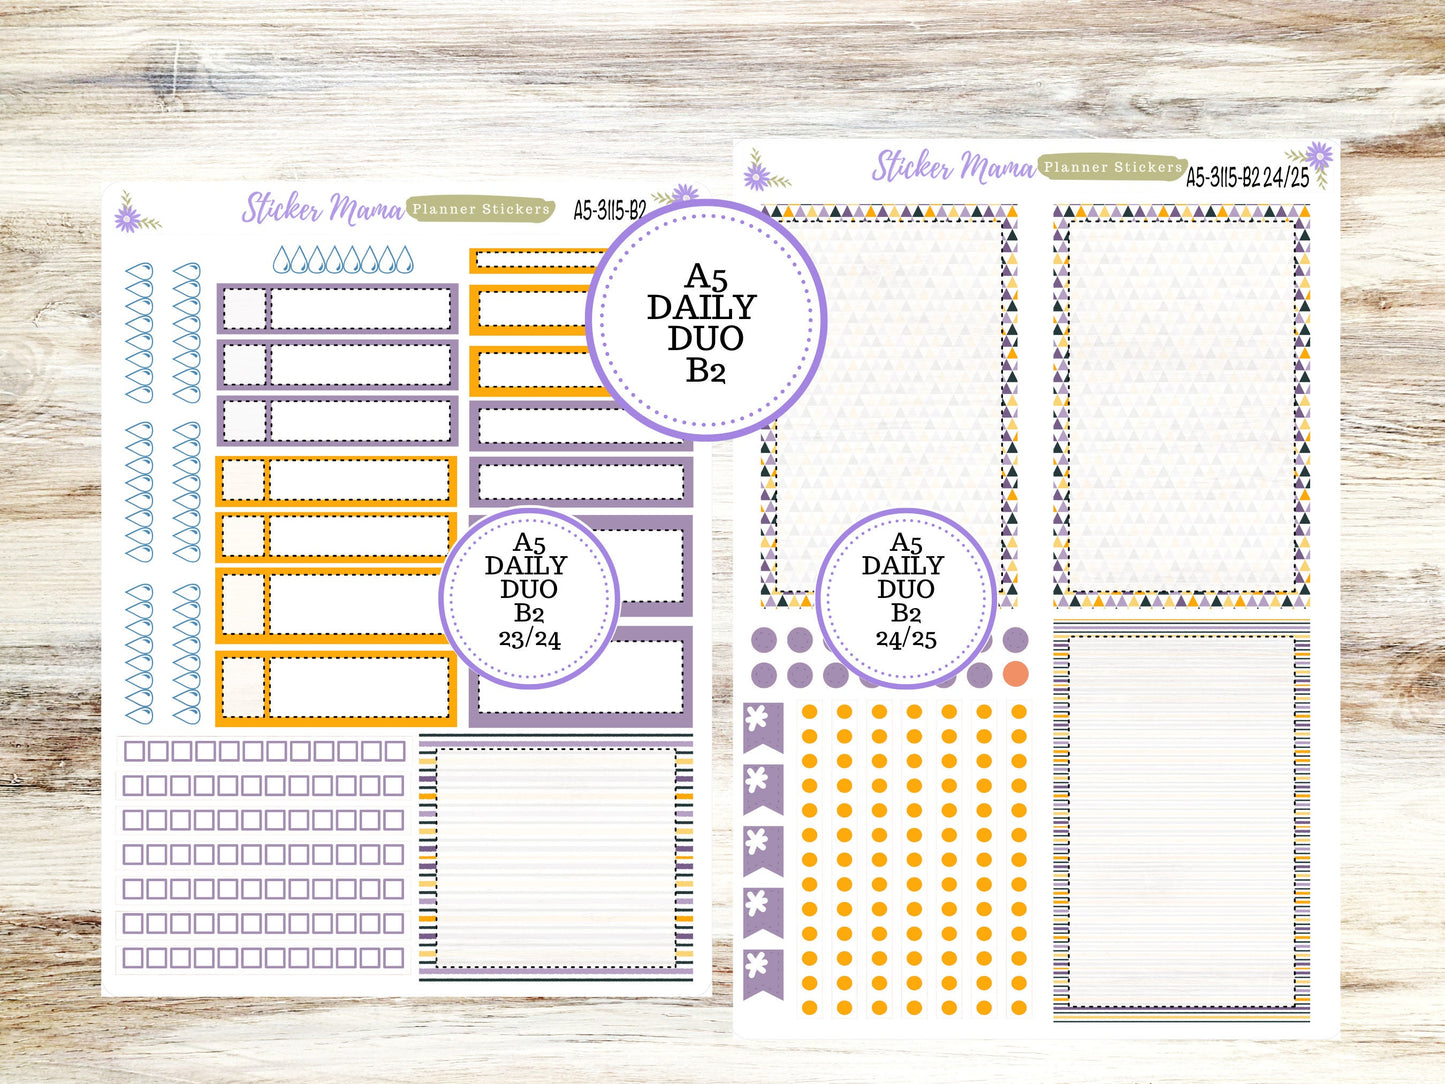 A5-DAILY DUO-Kit #3115  || Spooky Palette  || Planner Stickers - Daily Duo A5 Planner - Daily Duo Stickers - Daily Planner